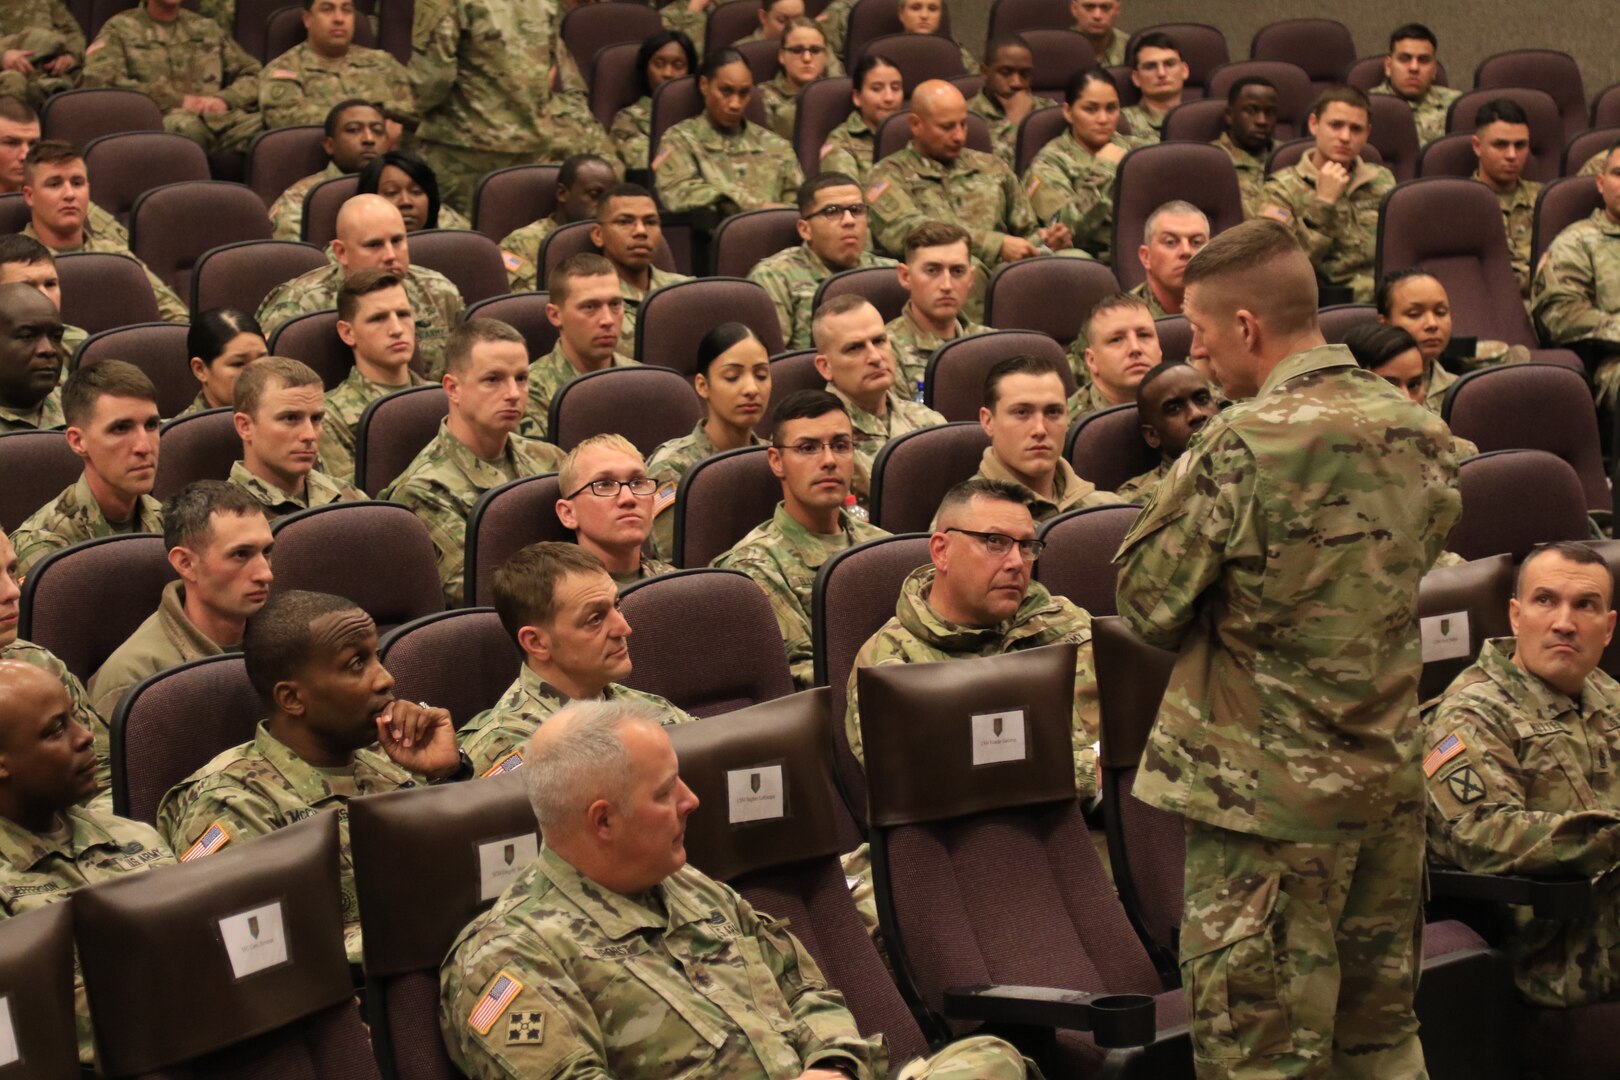 Soldiers of the 1st Infantry Division listen to Sgt. Maj. of the Army Daniel Dailey Nov. 30, 2018, during a question-and-answer session at Barlow Theater, Fort Riley, Kansas. Dailey explained changes coming to the noncommissioned officer education system.